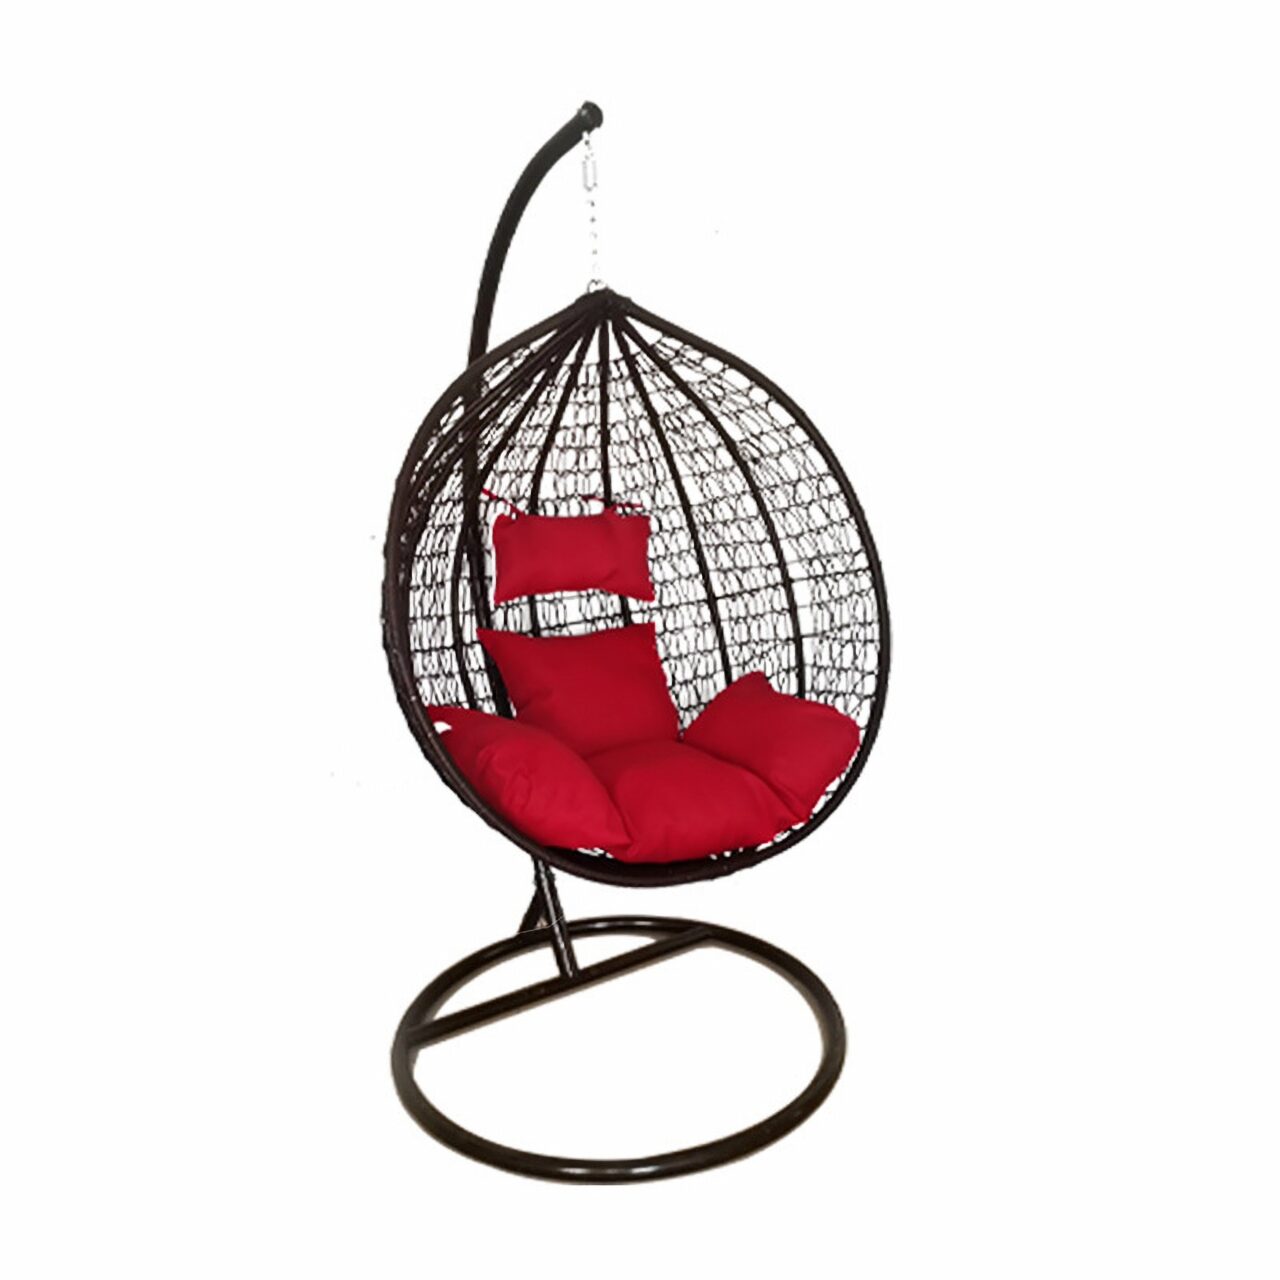 Hanging Rattan Egg Chair - Brown with Red Cushions